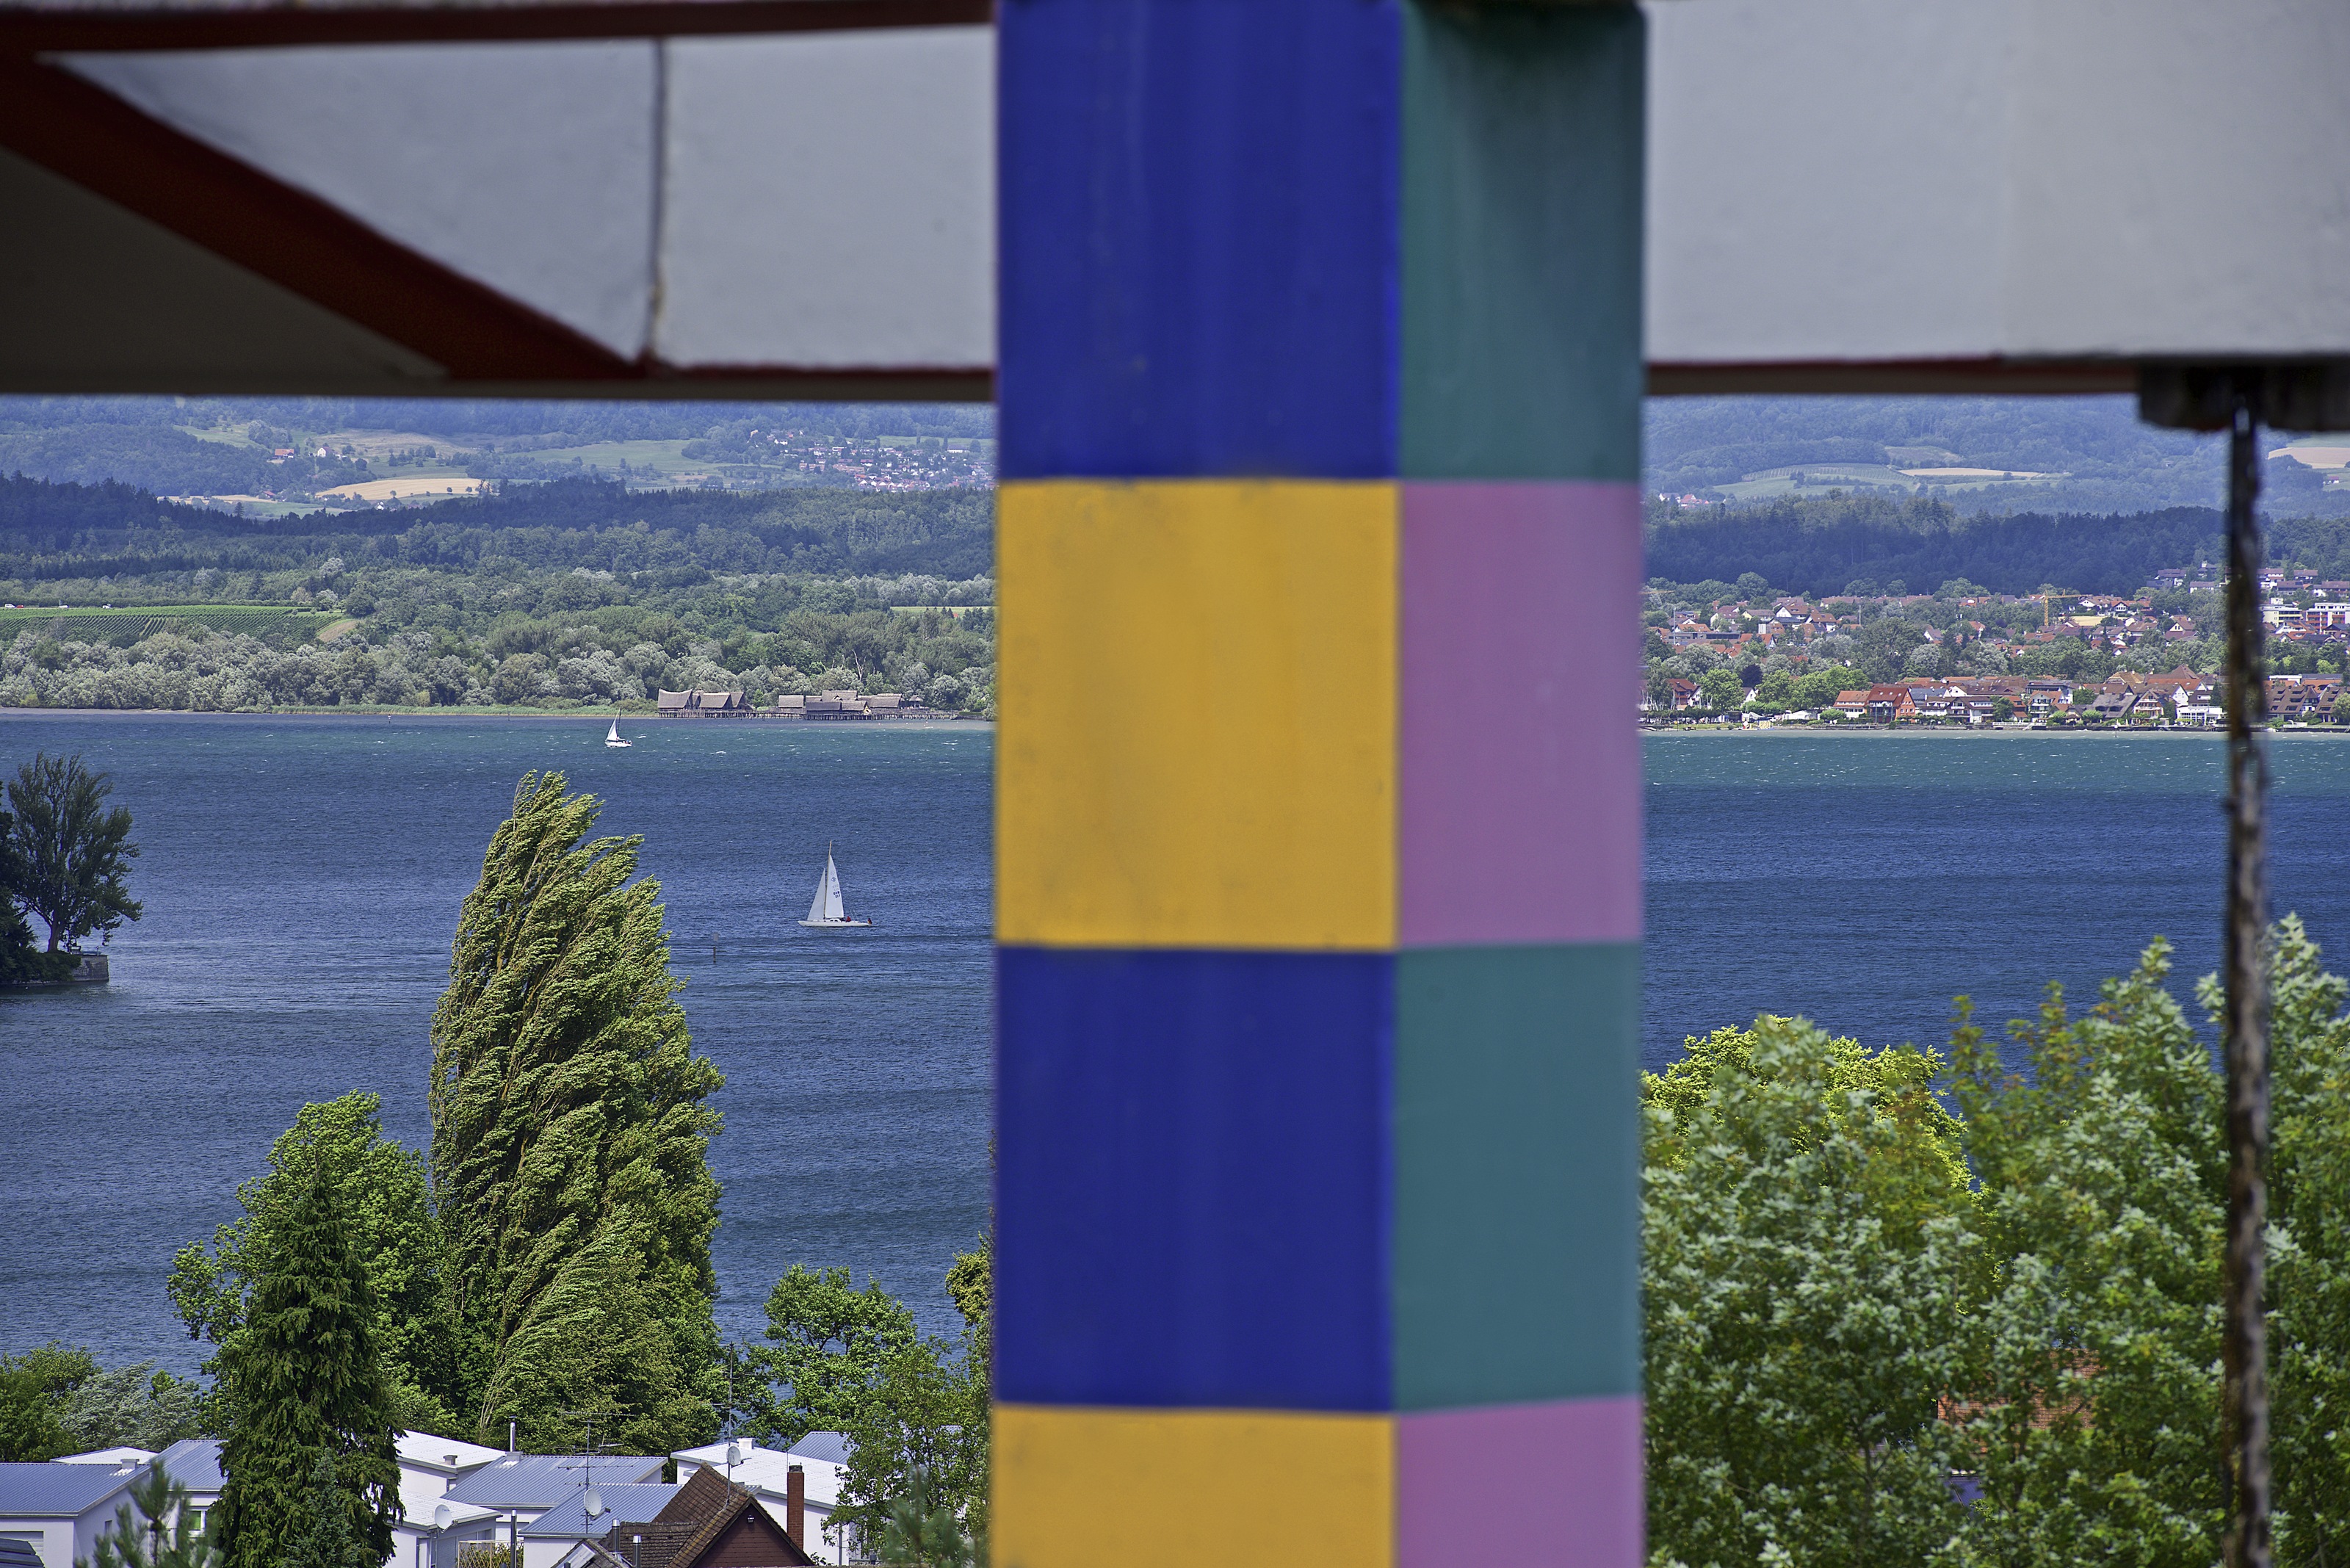 Second conference of the Academy of Sociology at the University of Konstanz from 25 to 27 September 2019 